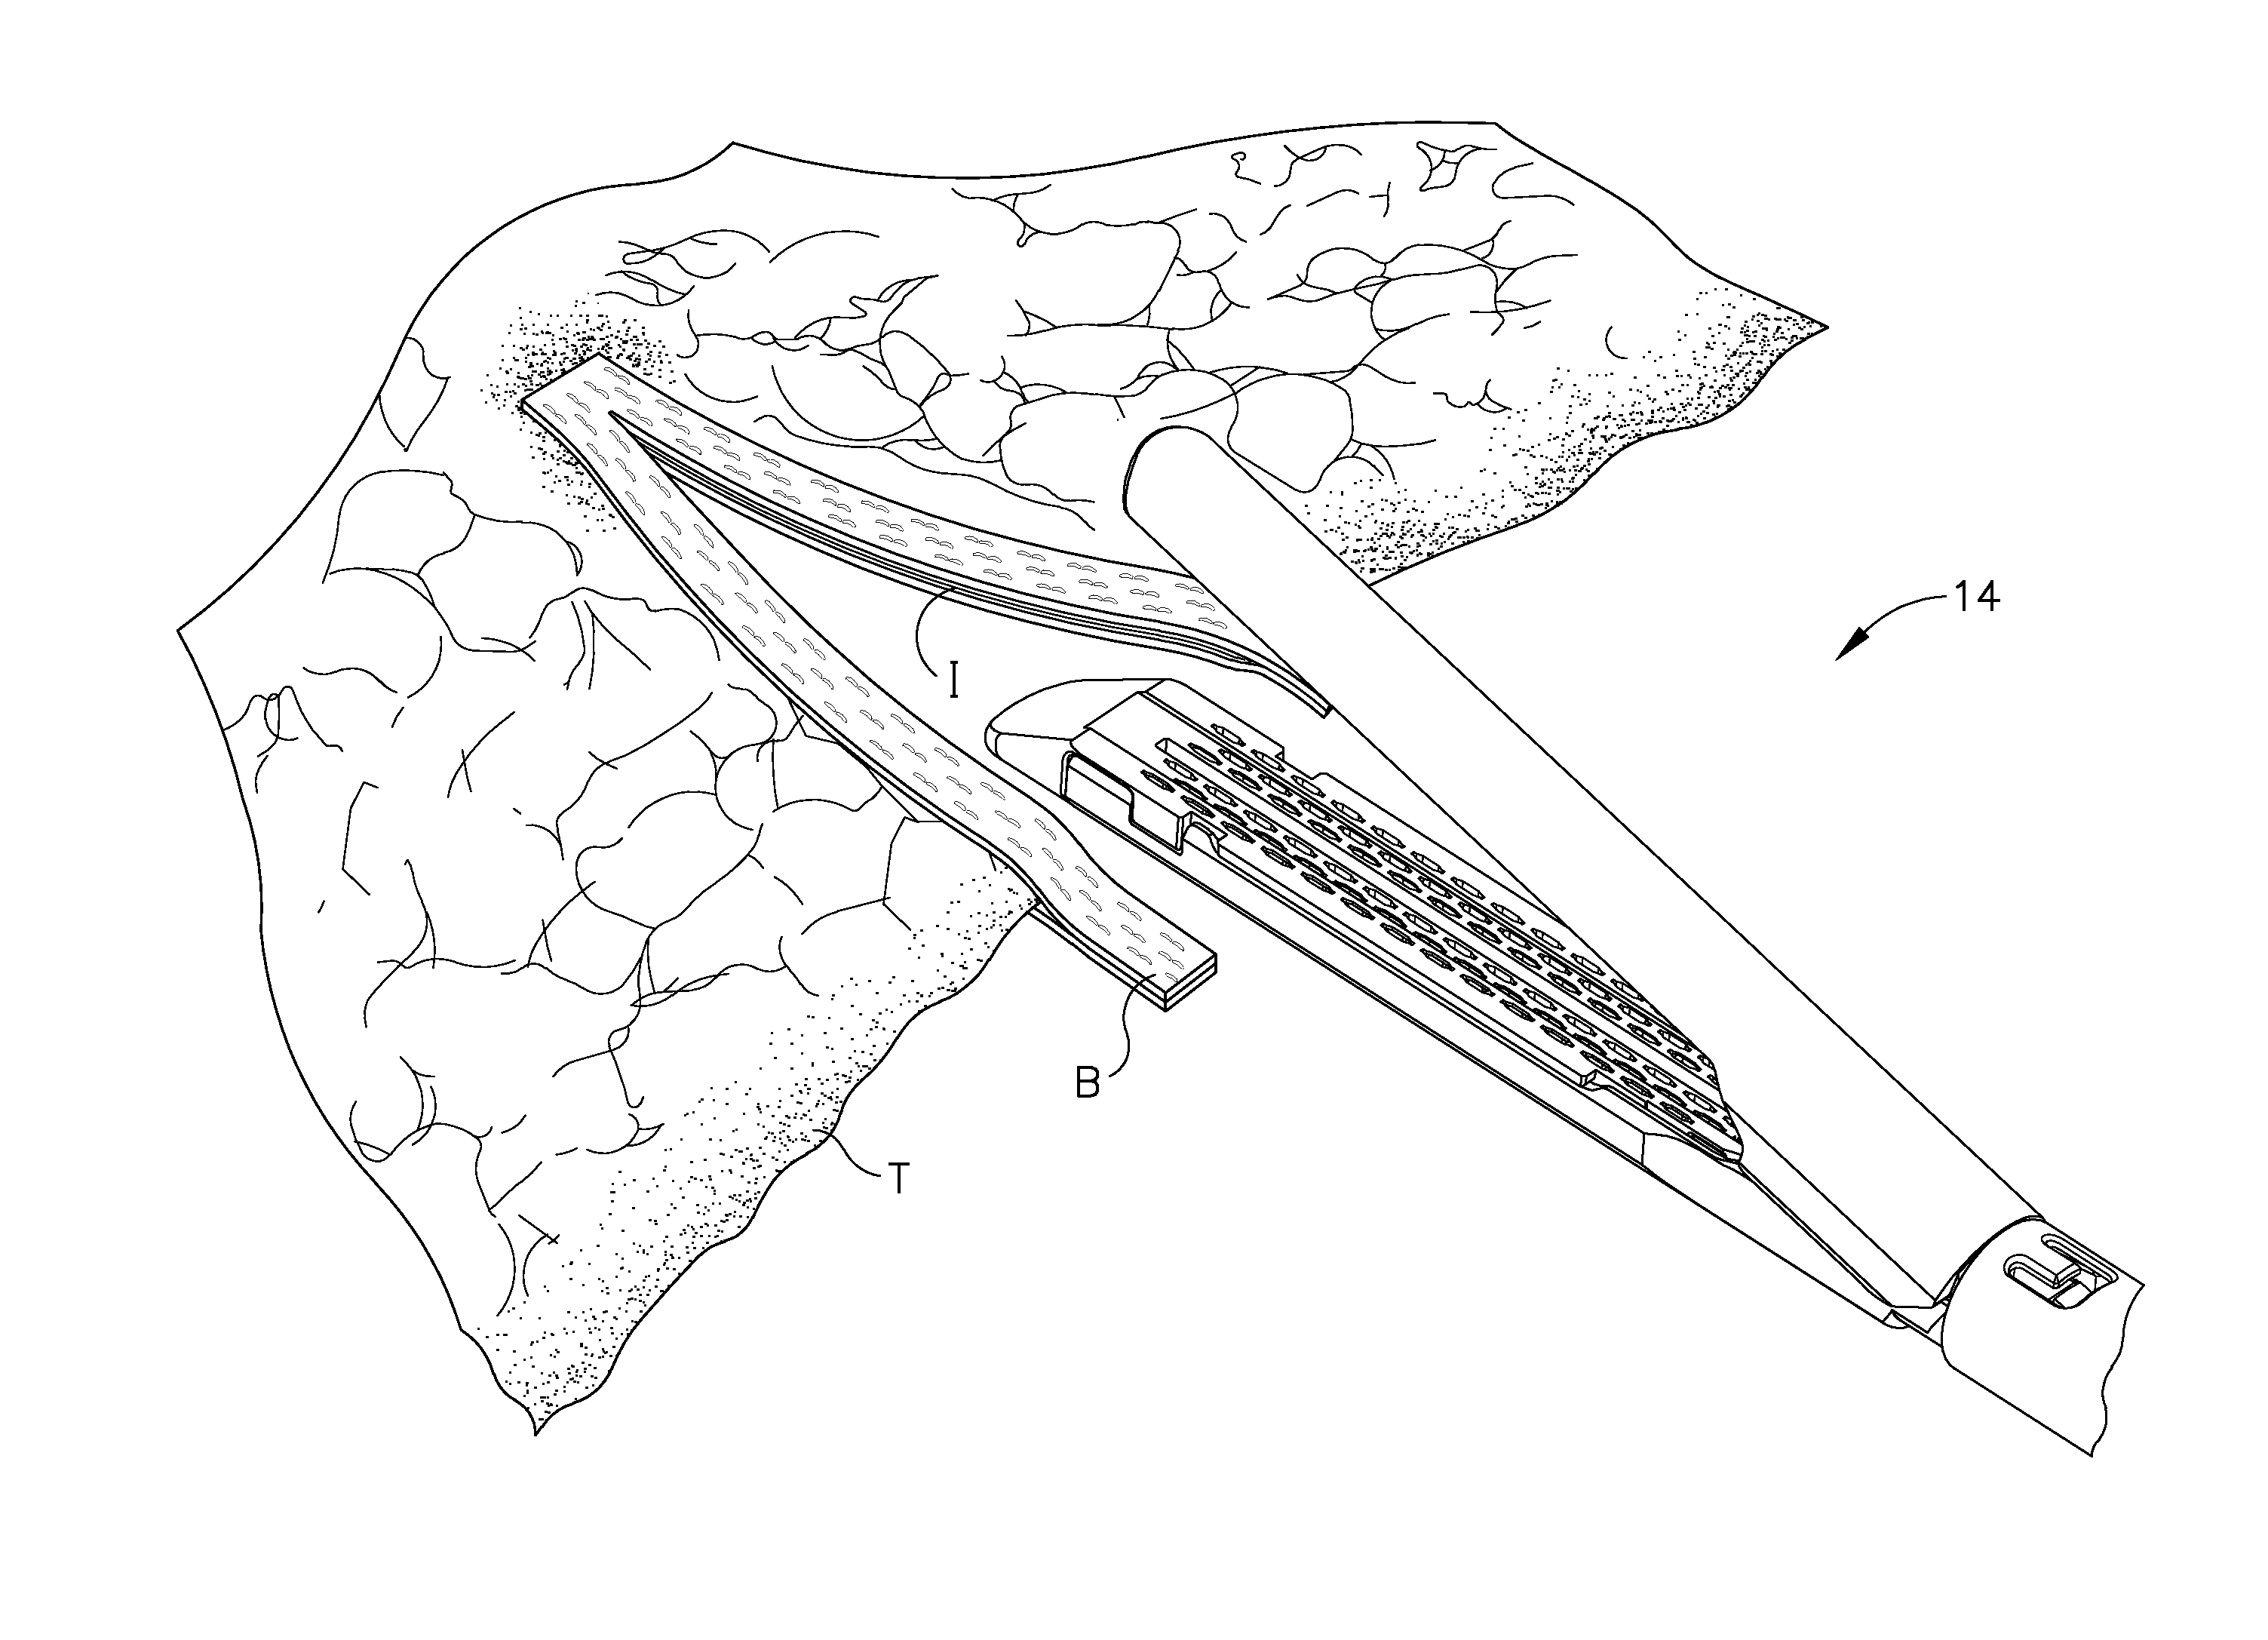 Buttress material with alignment and retention features for use with surgical end effectors